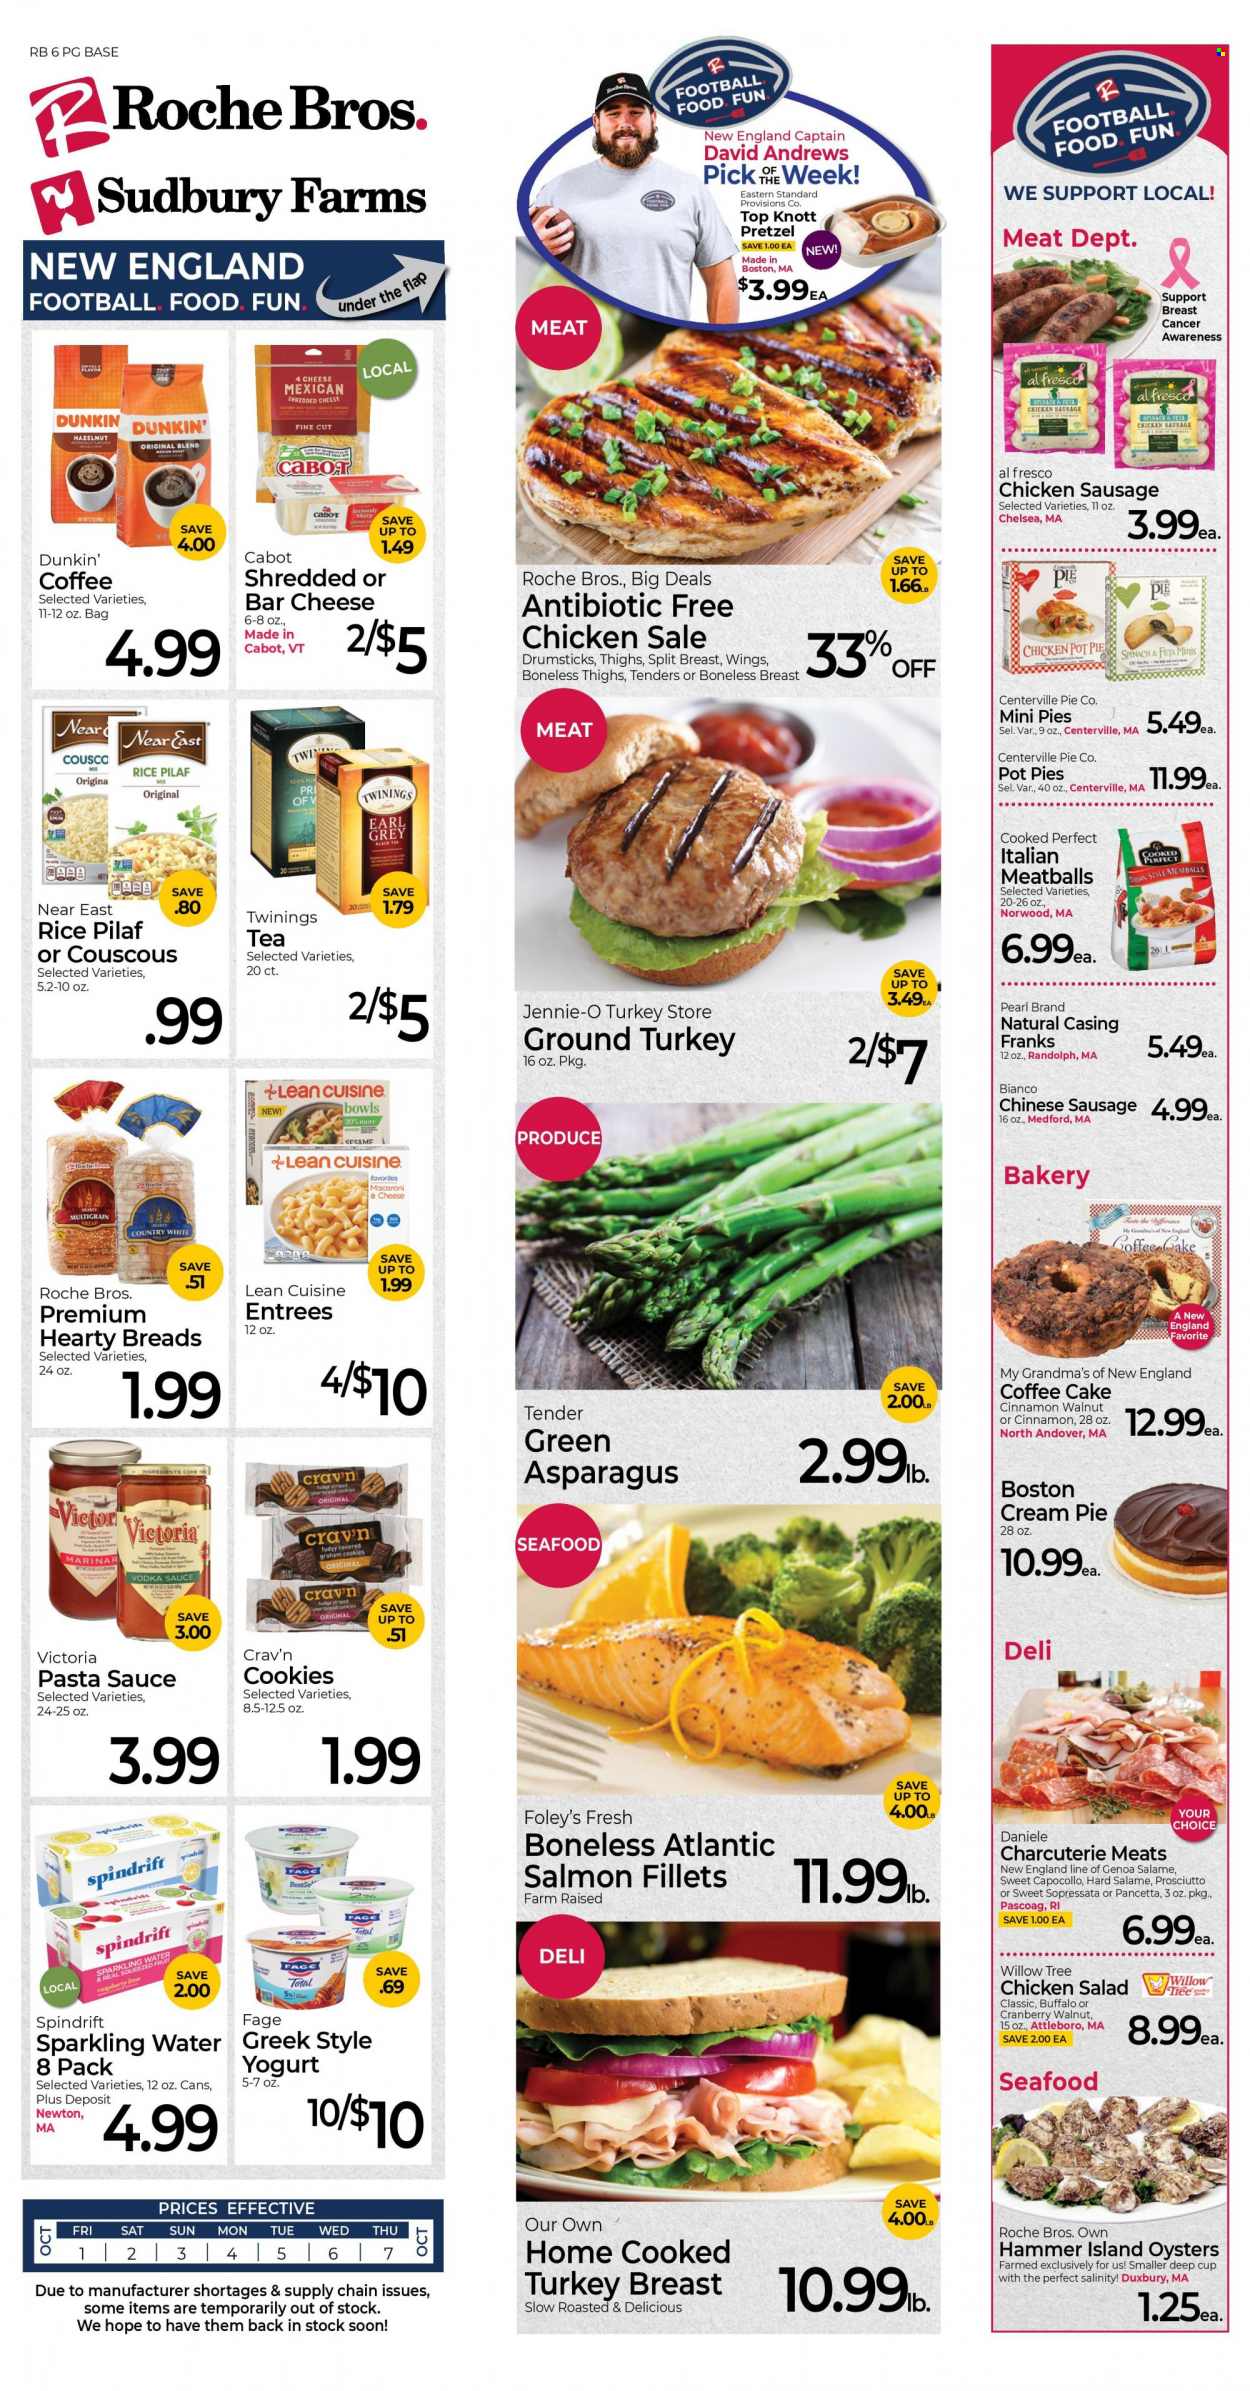 thumbnail - Roche Bros. Flyer - 10/01/2021 - 10/07/2021 - Sales products - bread, pretzels, pie, pot pie, cream pie, coffee cake, asparagus, salad, fish fillets, salmon, salmon fillet, oysters, pasta sauce, meatballs, sauce, Lean Cuisine, ready meal, salami, prosciutto, pancetta, capocollo, charcuterie, chicken sausage, frankfurters, chicken salad, meat salad, shredded cheese, yoghurt, cookies, bars, couscous, rice, Spindrift, sparkling water, water, tea, Twinings, ground turkey, Victor. Page 1.